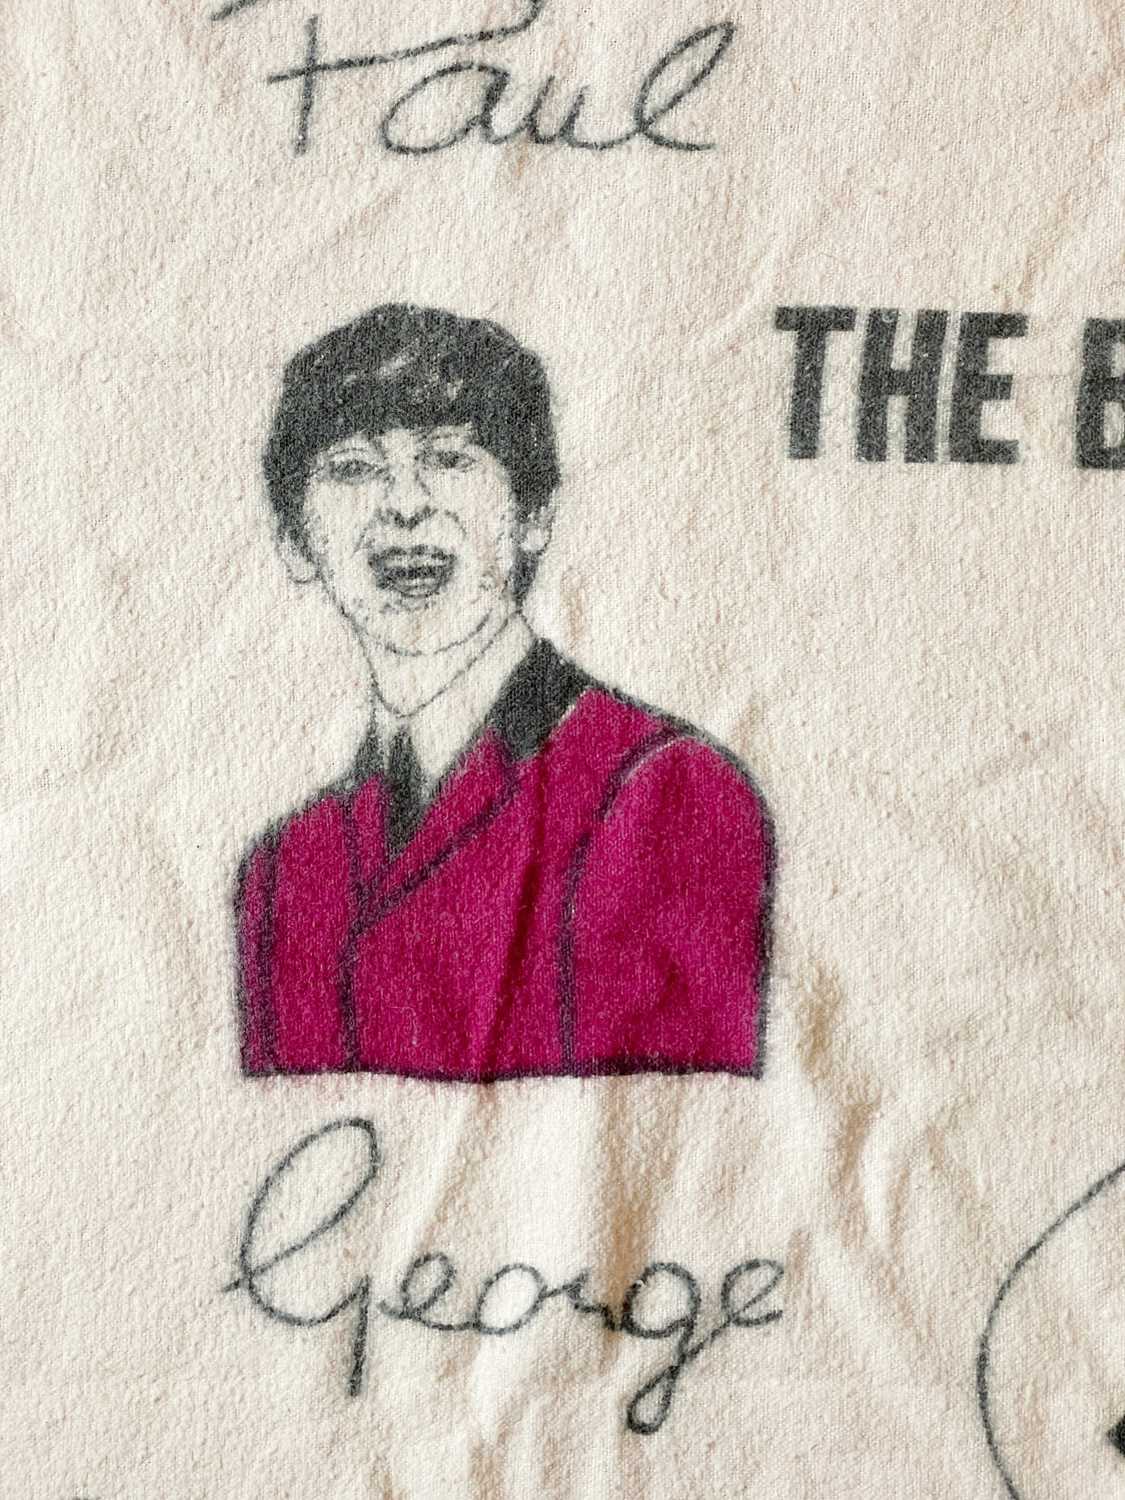 The Beatles, an original 1960s blanket by 'Witney'. - Image 2 of 6